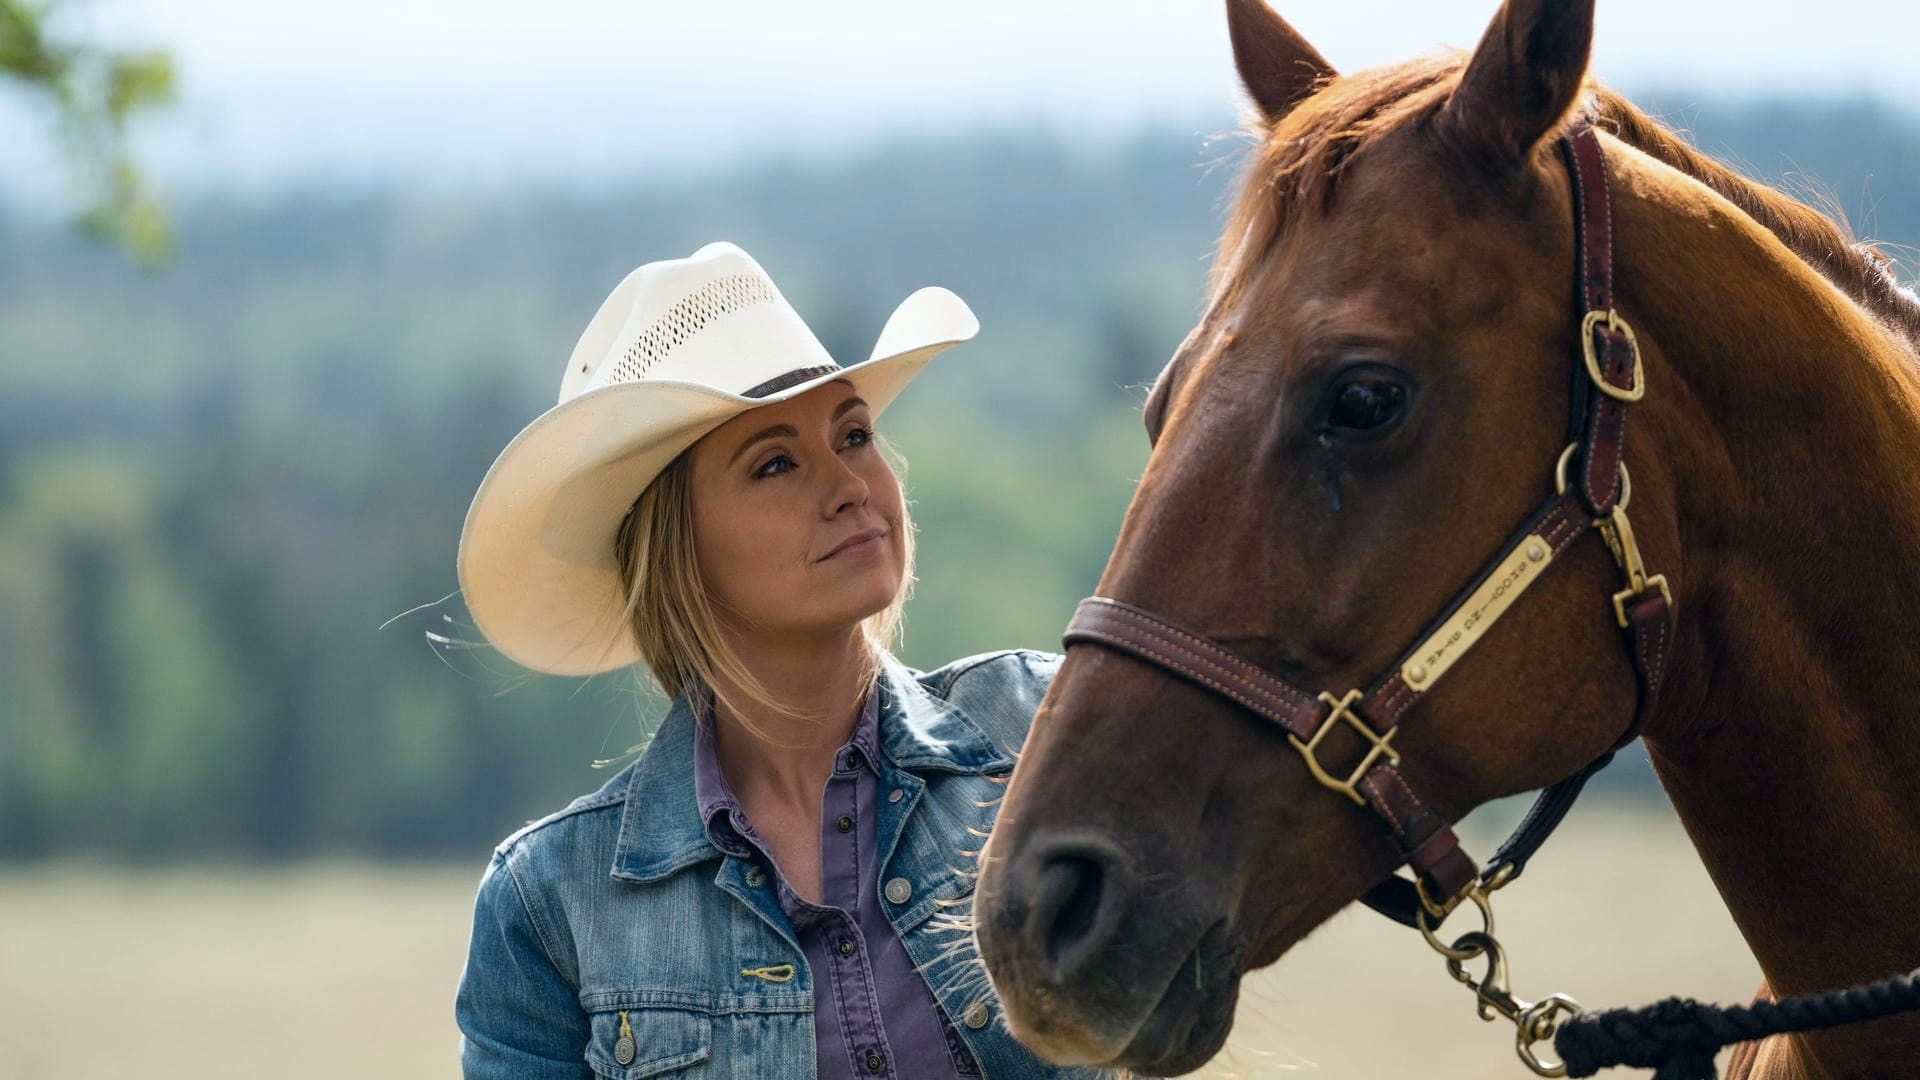 Early Seasons Of ‘Heartland’ Have Been Removed From Netflix Internationally